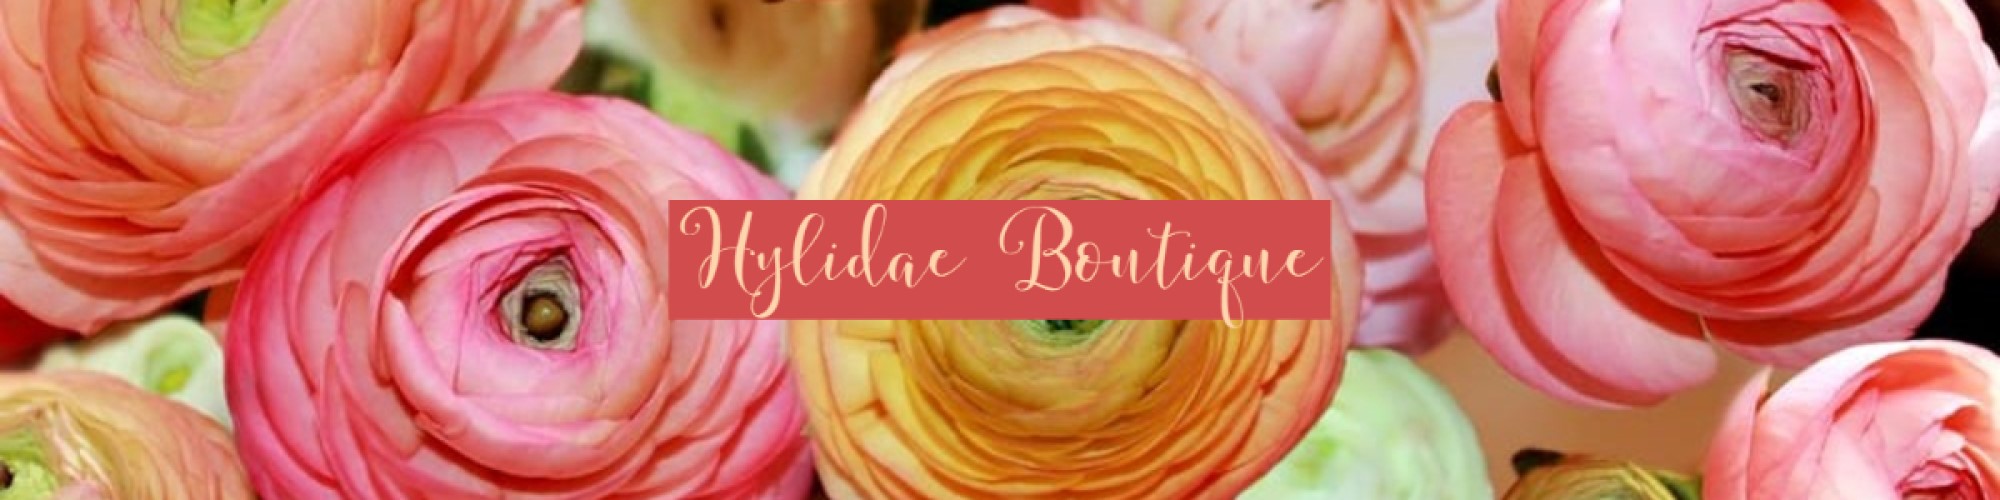 Hylidae Boutique